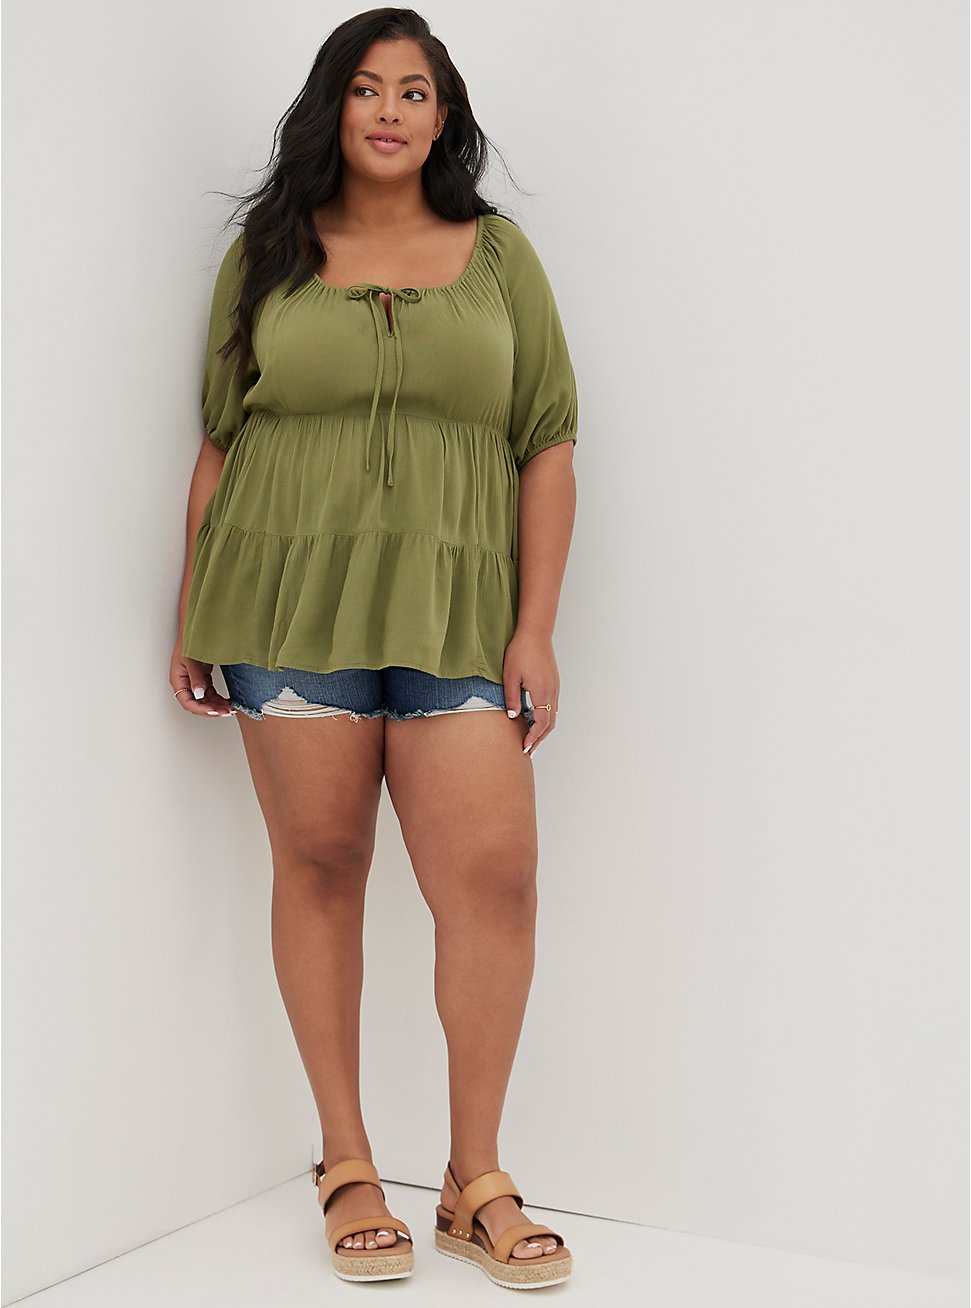 Plus Size Tiered Babydoll Top - Crinkle Gauze Green, OLIVE, hi-res